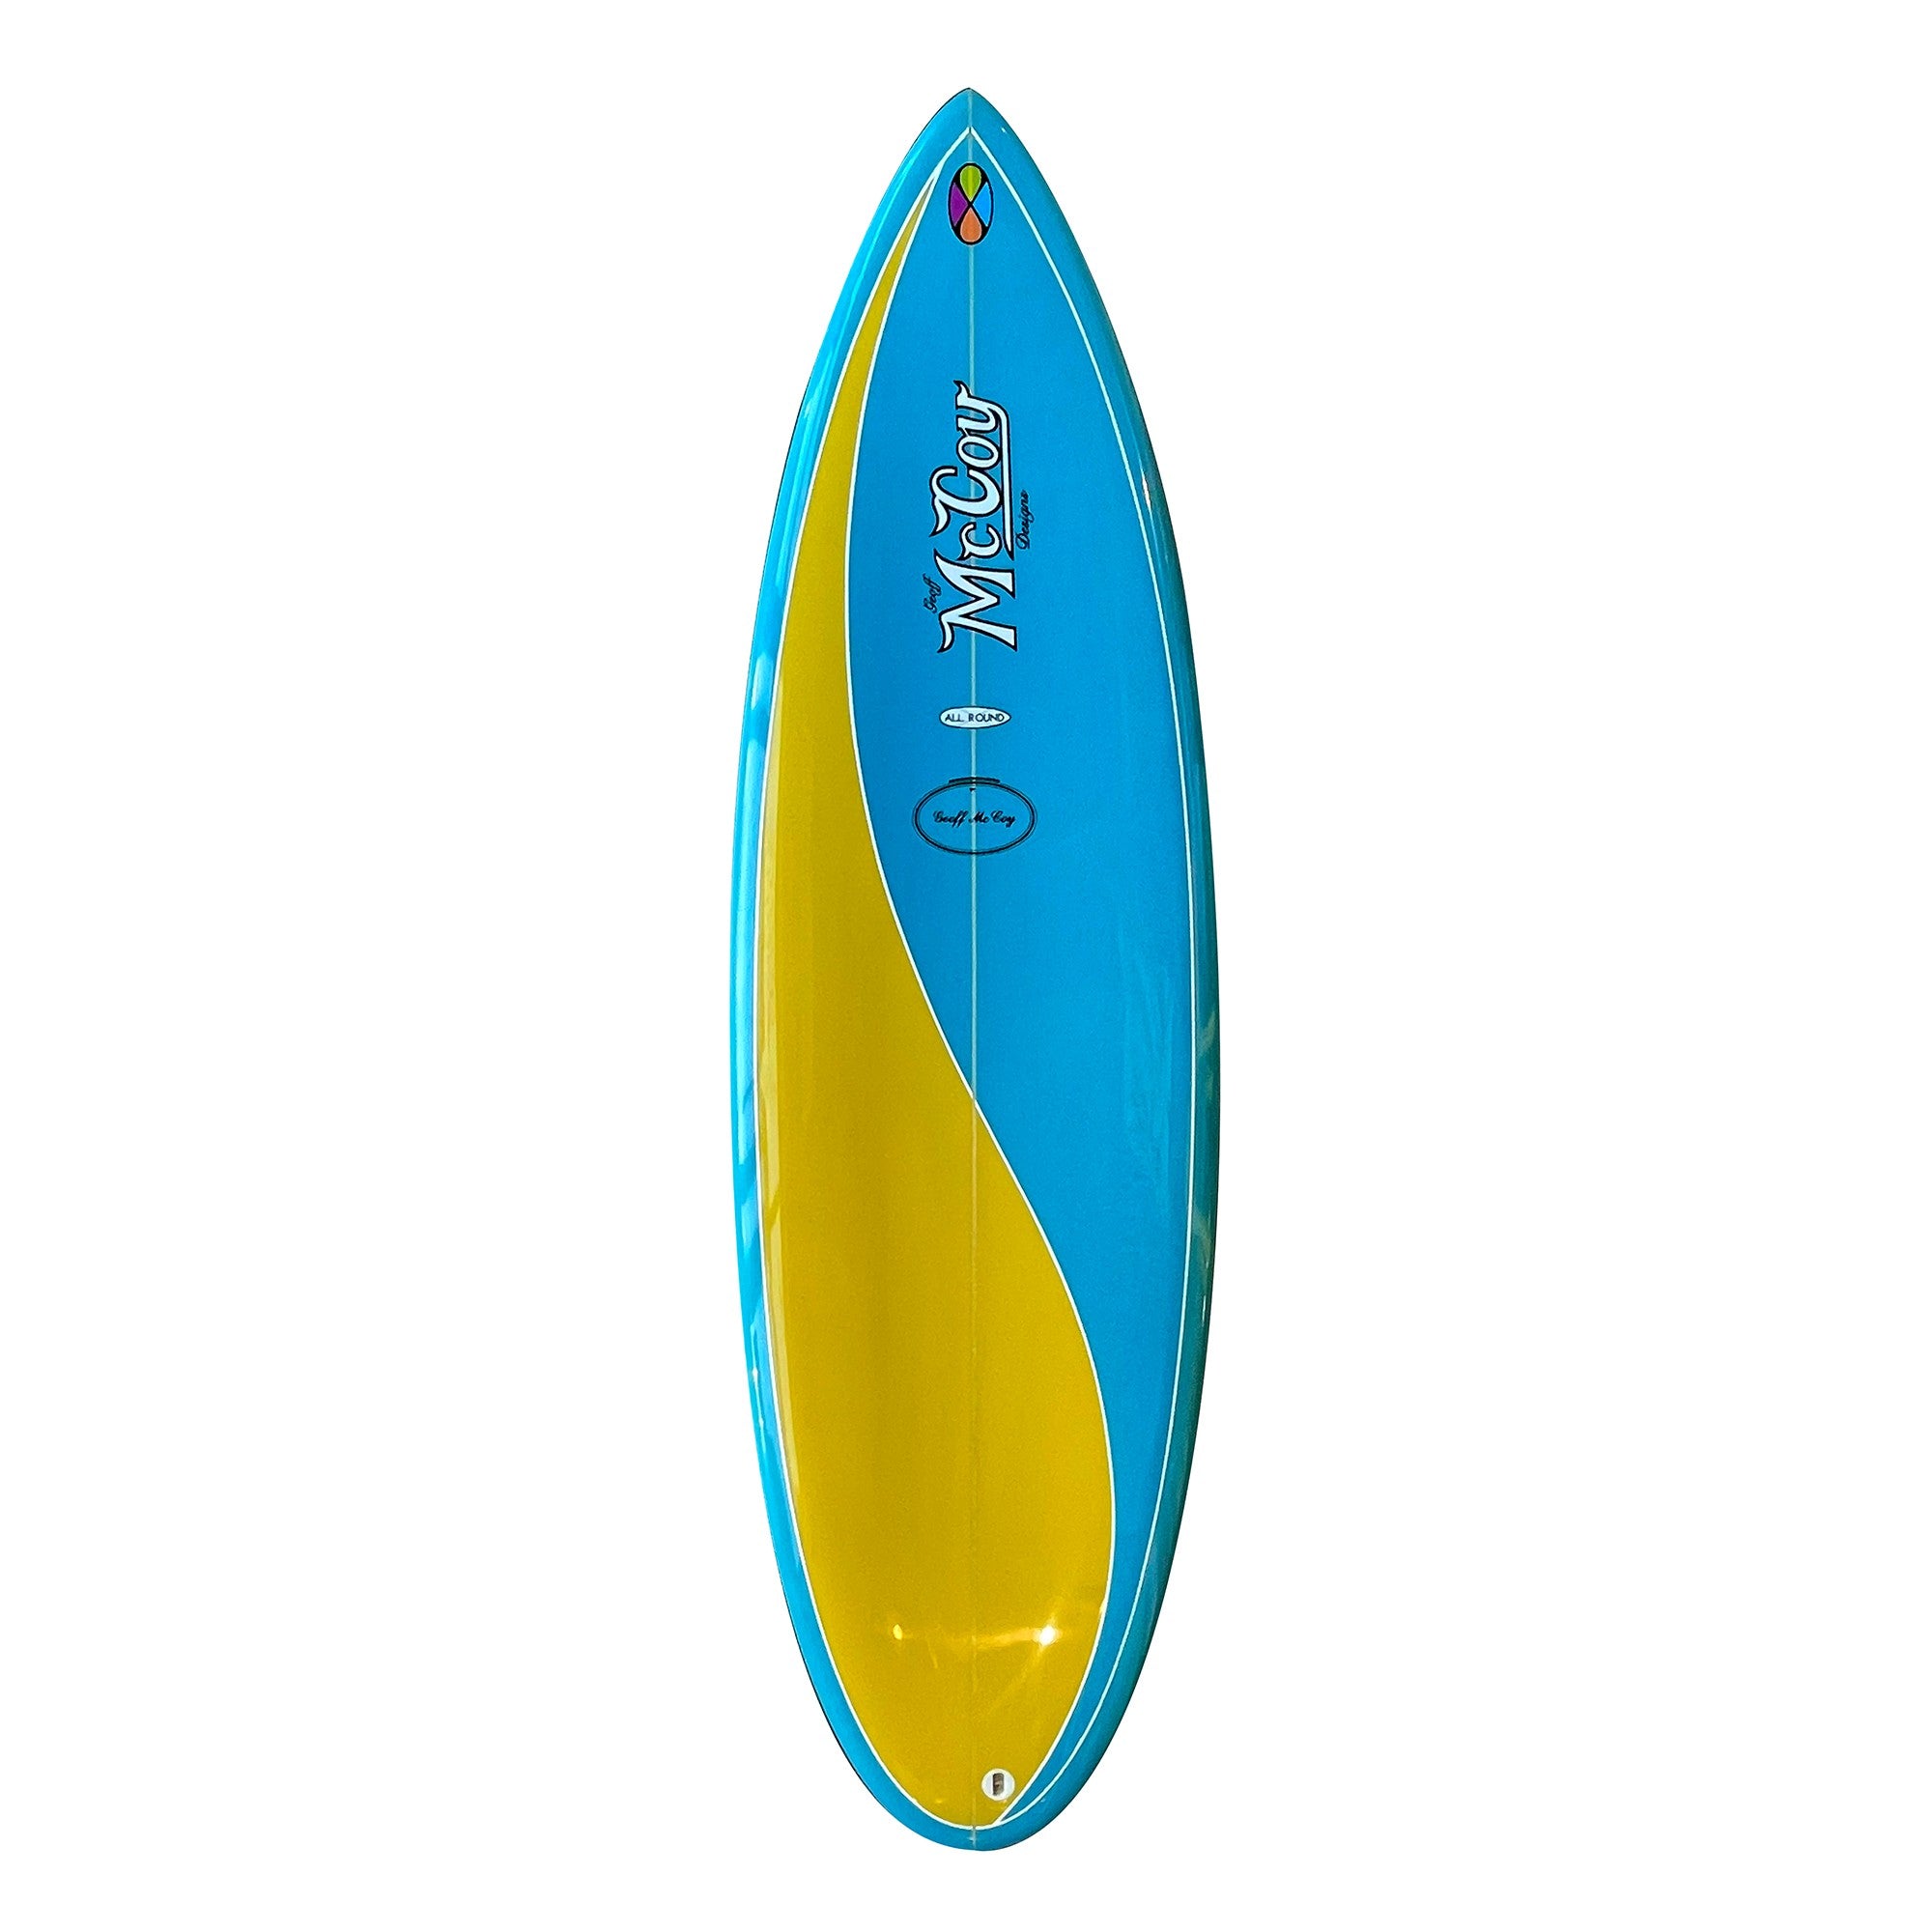 McCOY Surfboards - All Round Nugget (PU) - Blue / Yellow - 5'8